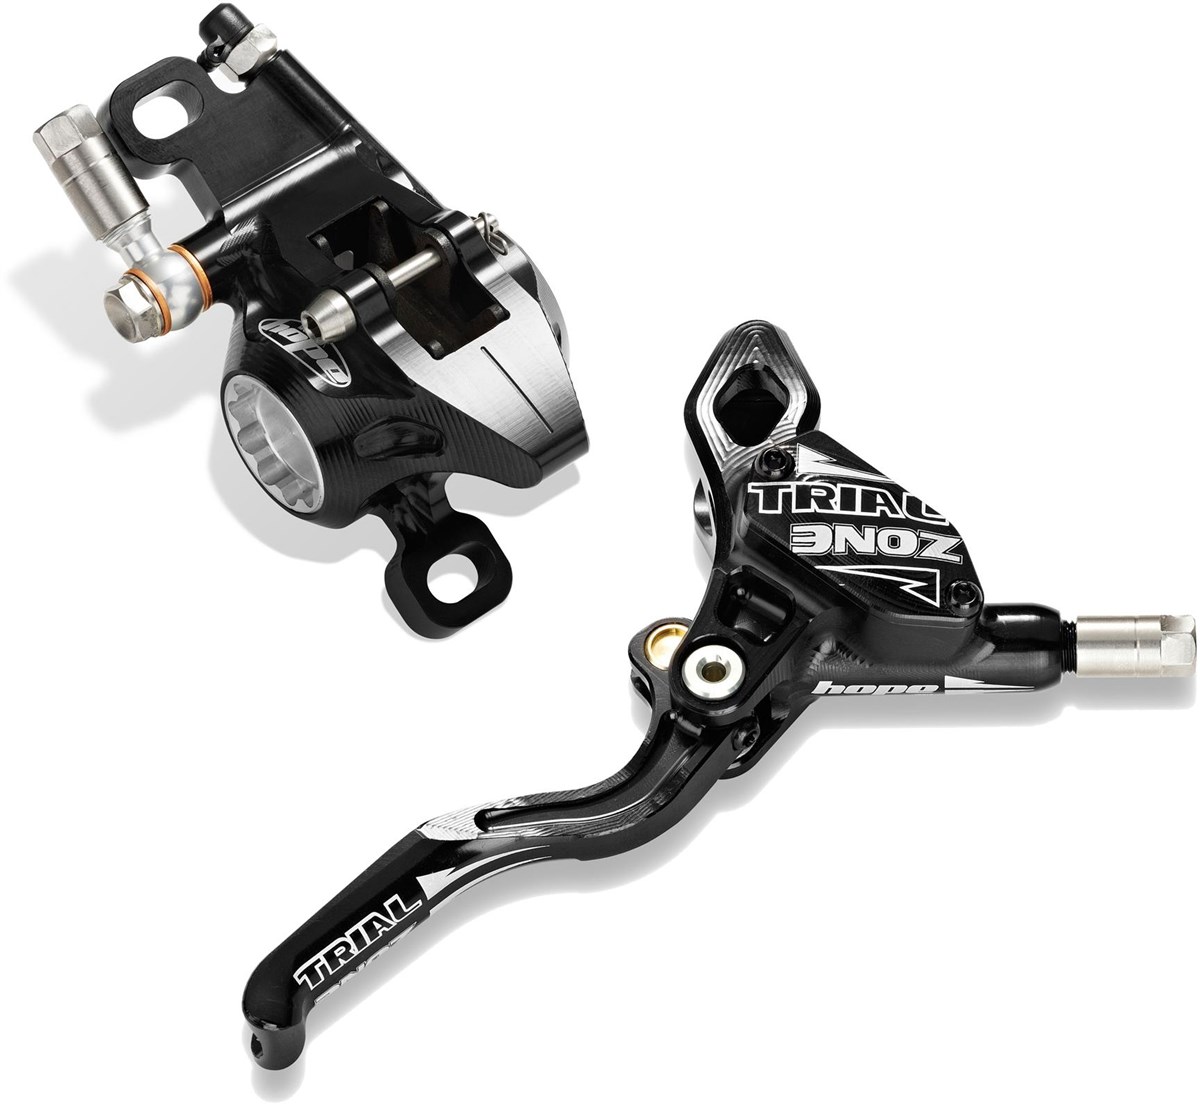 Hope Trial Zone Disc Brake - No Rotor product image